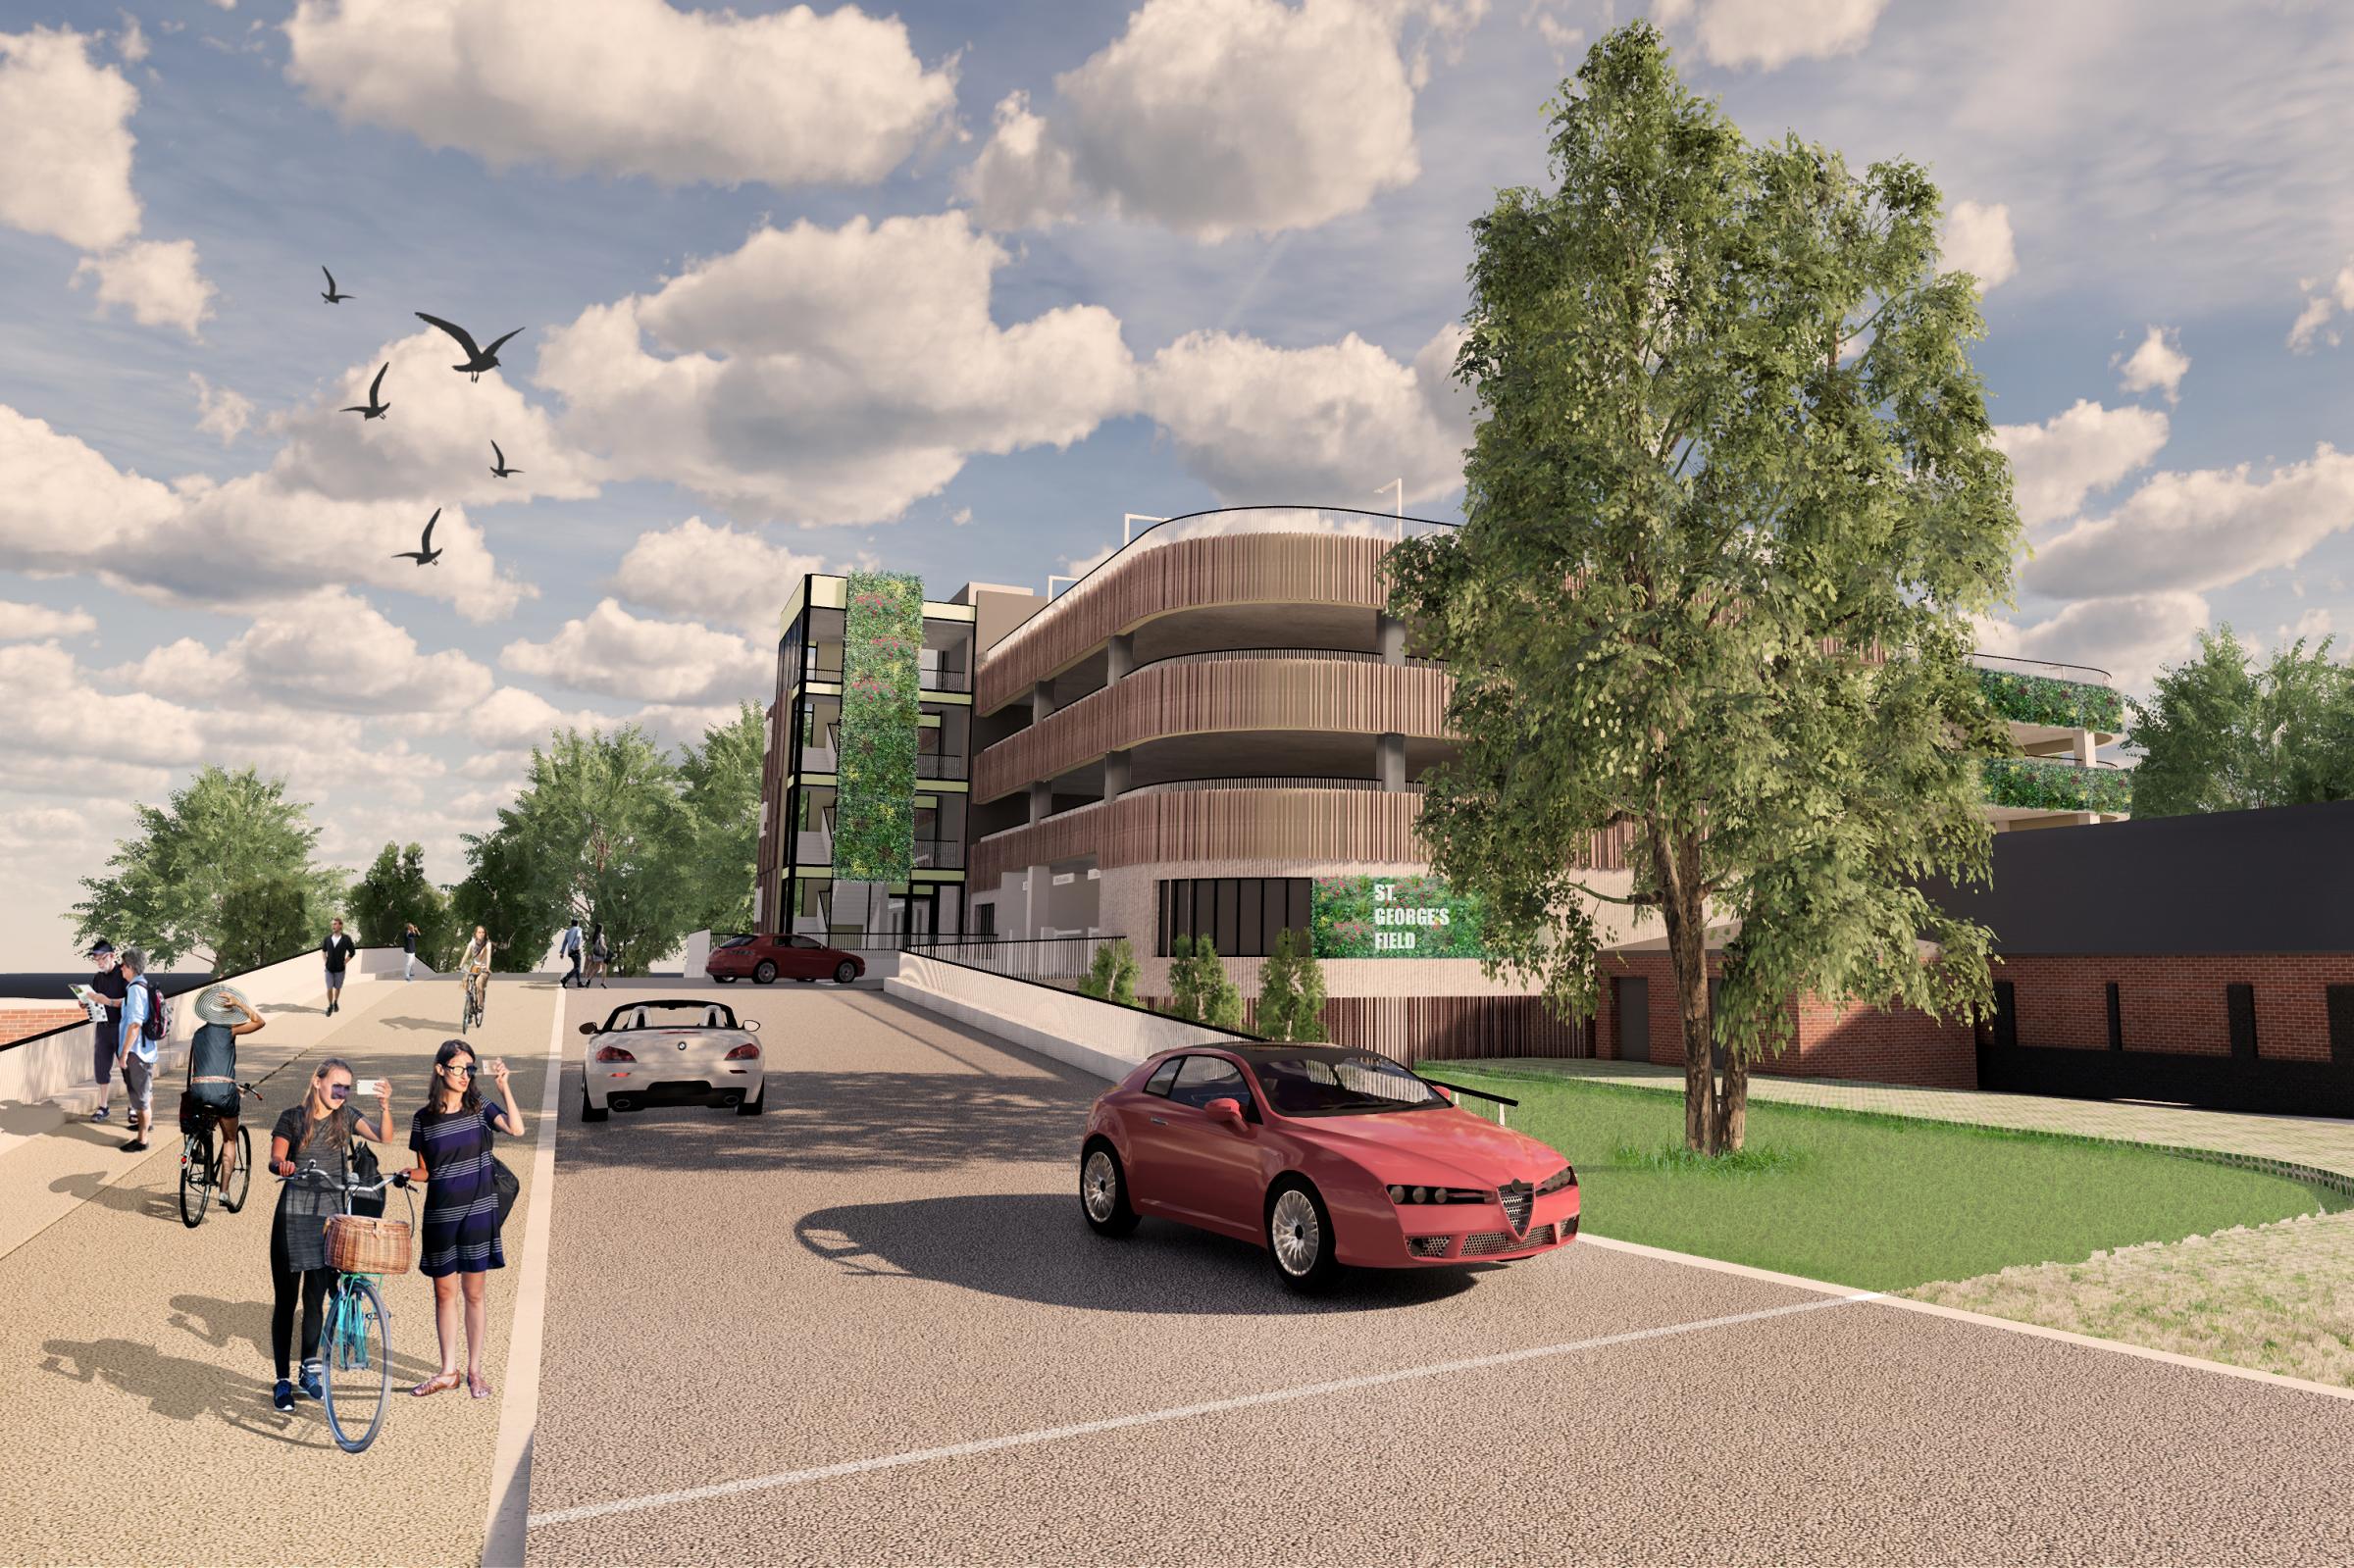 Plans for new four-storey car park in York city centre submitted